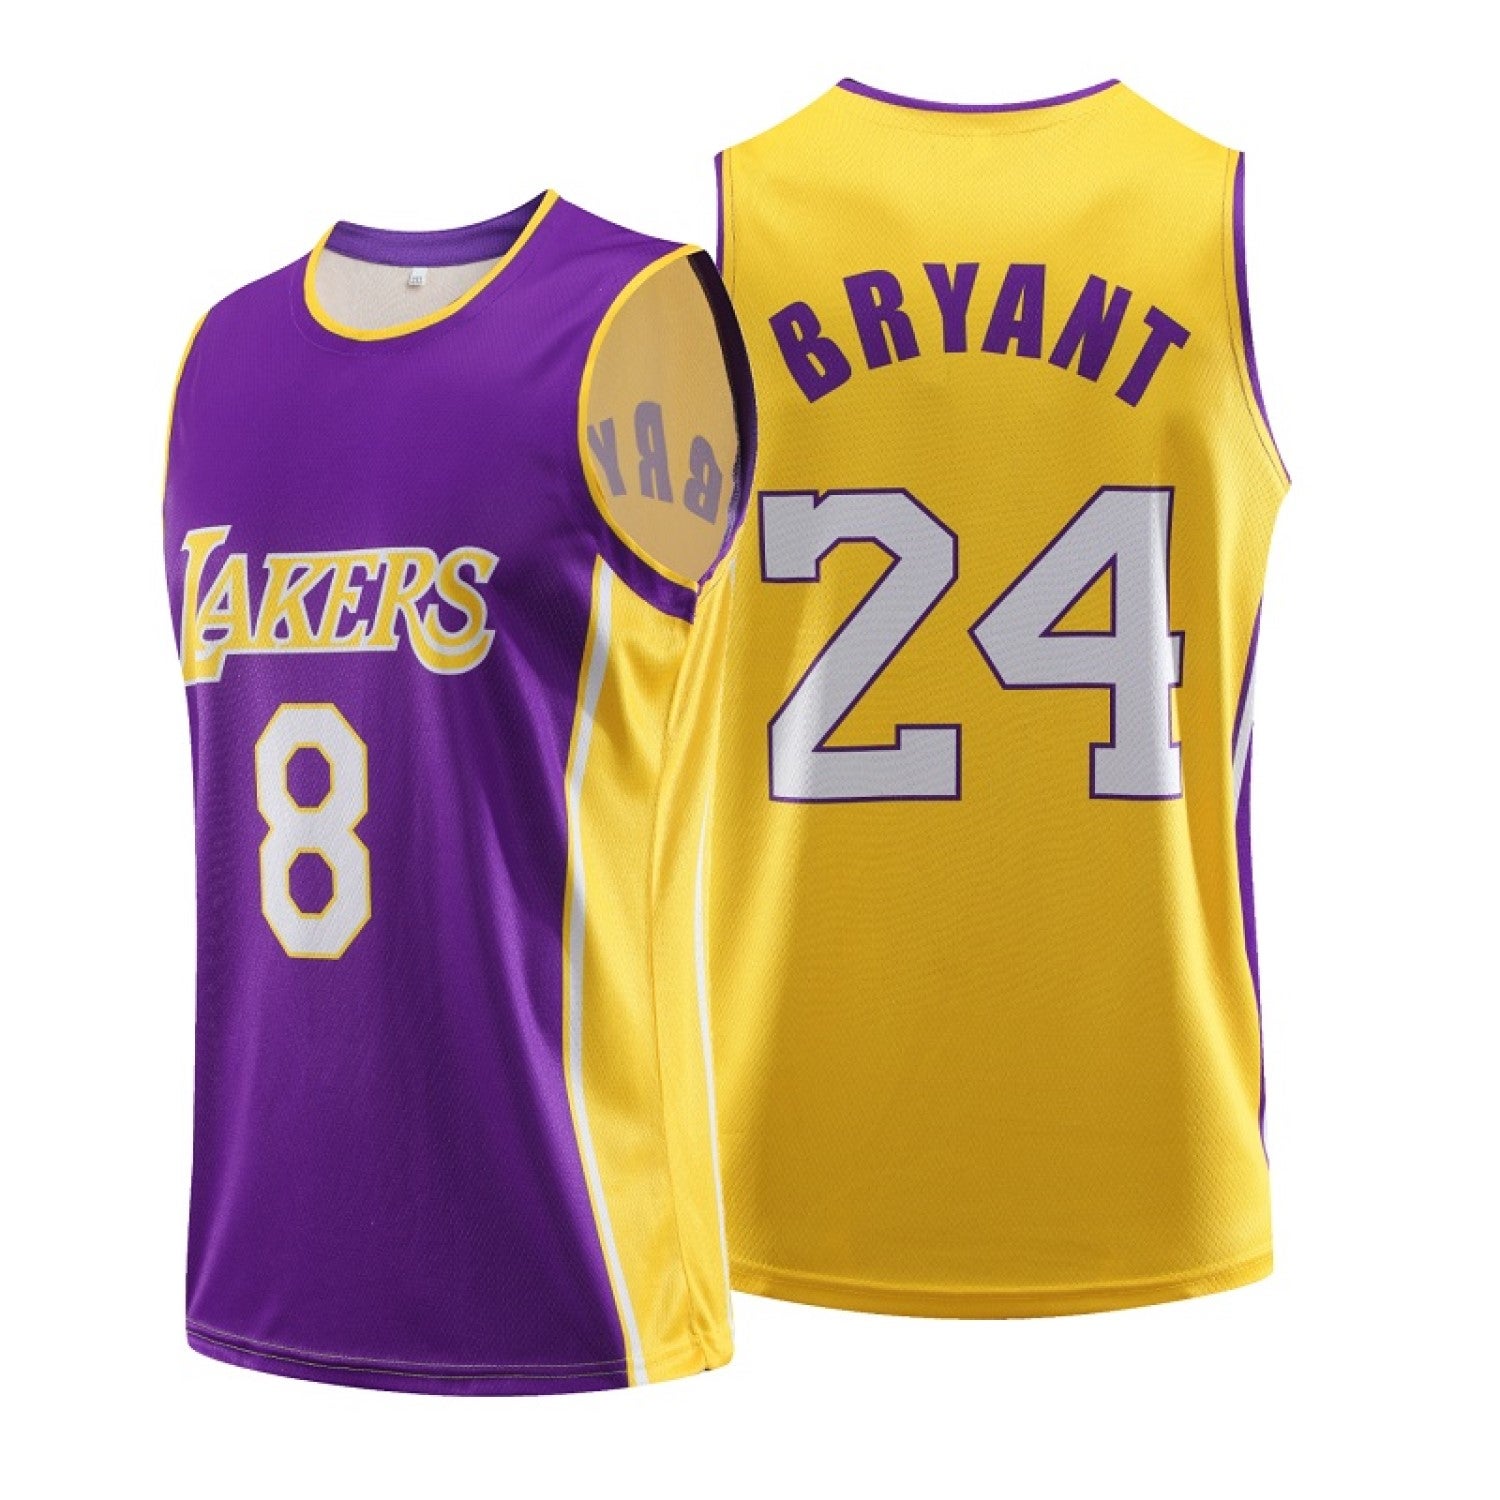 Buy NBA Los Angeles Lakers Bryant K # 24 Boys 8-20 Replica Road Jersey,  Small (8), Purple Online at Low Prices in India 